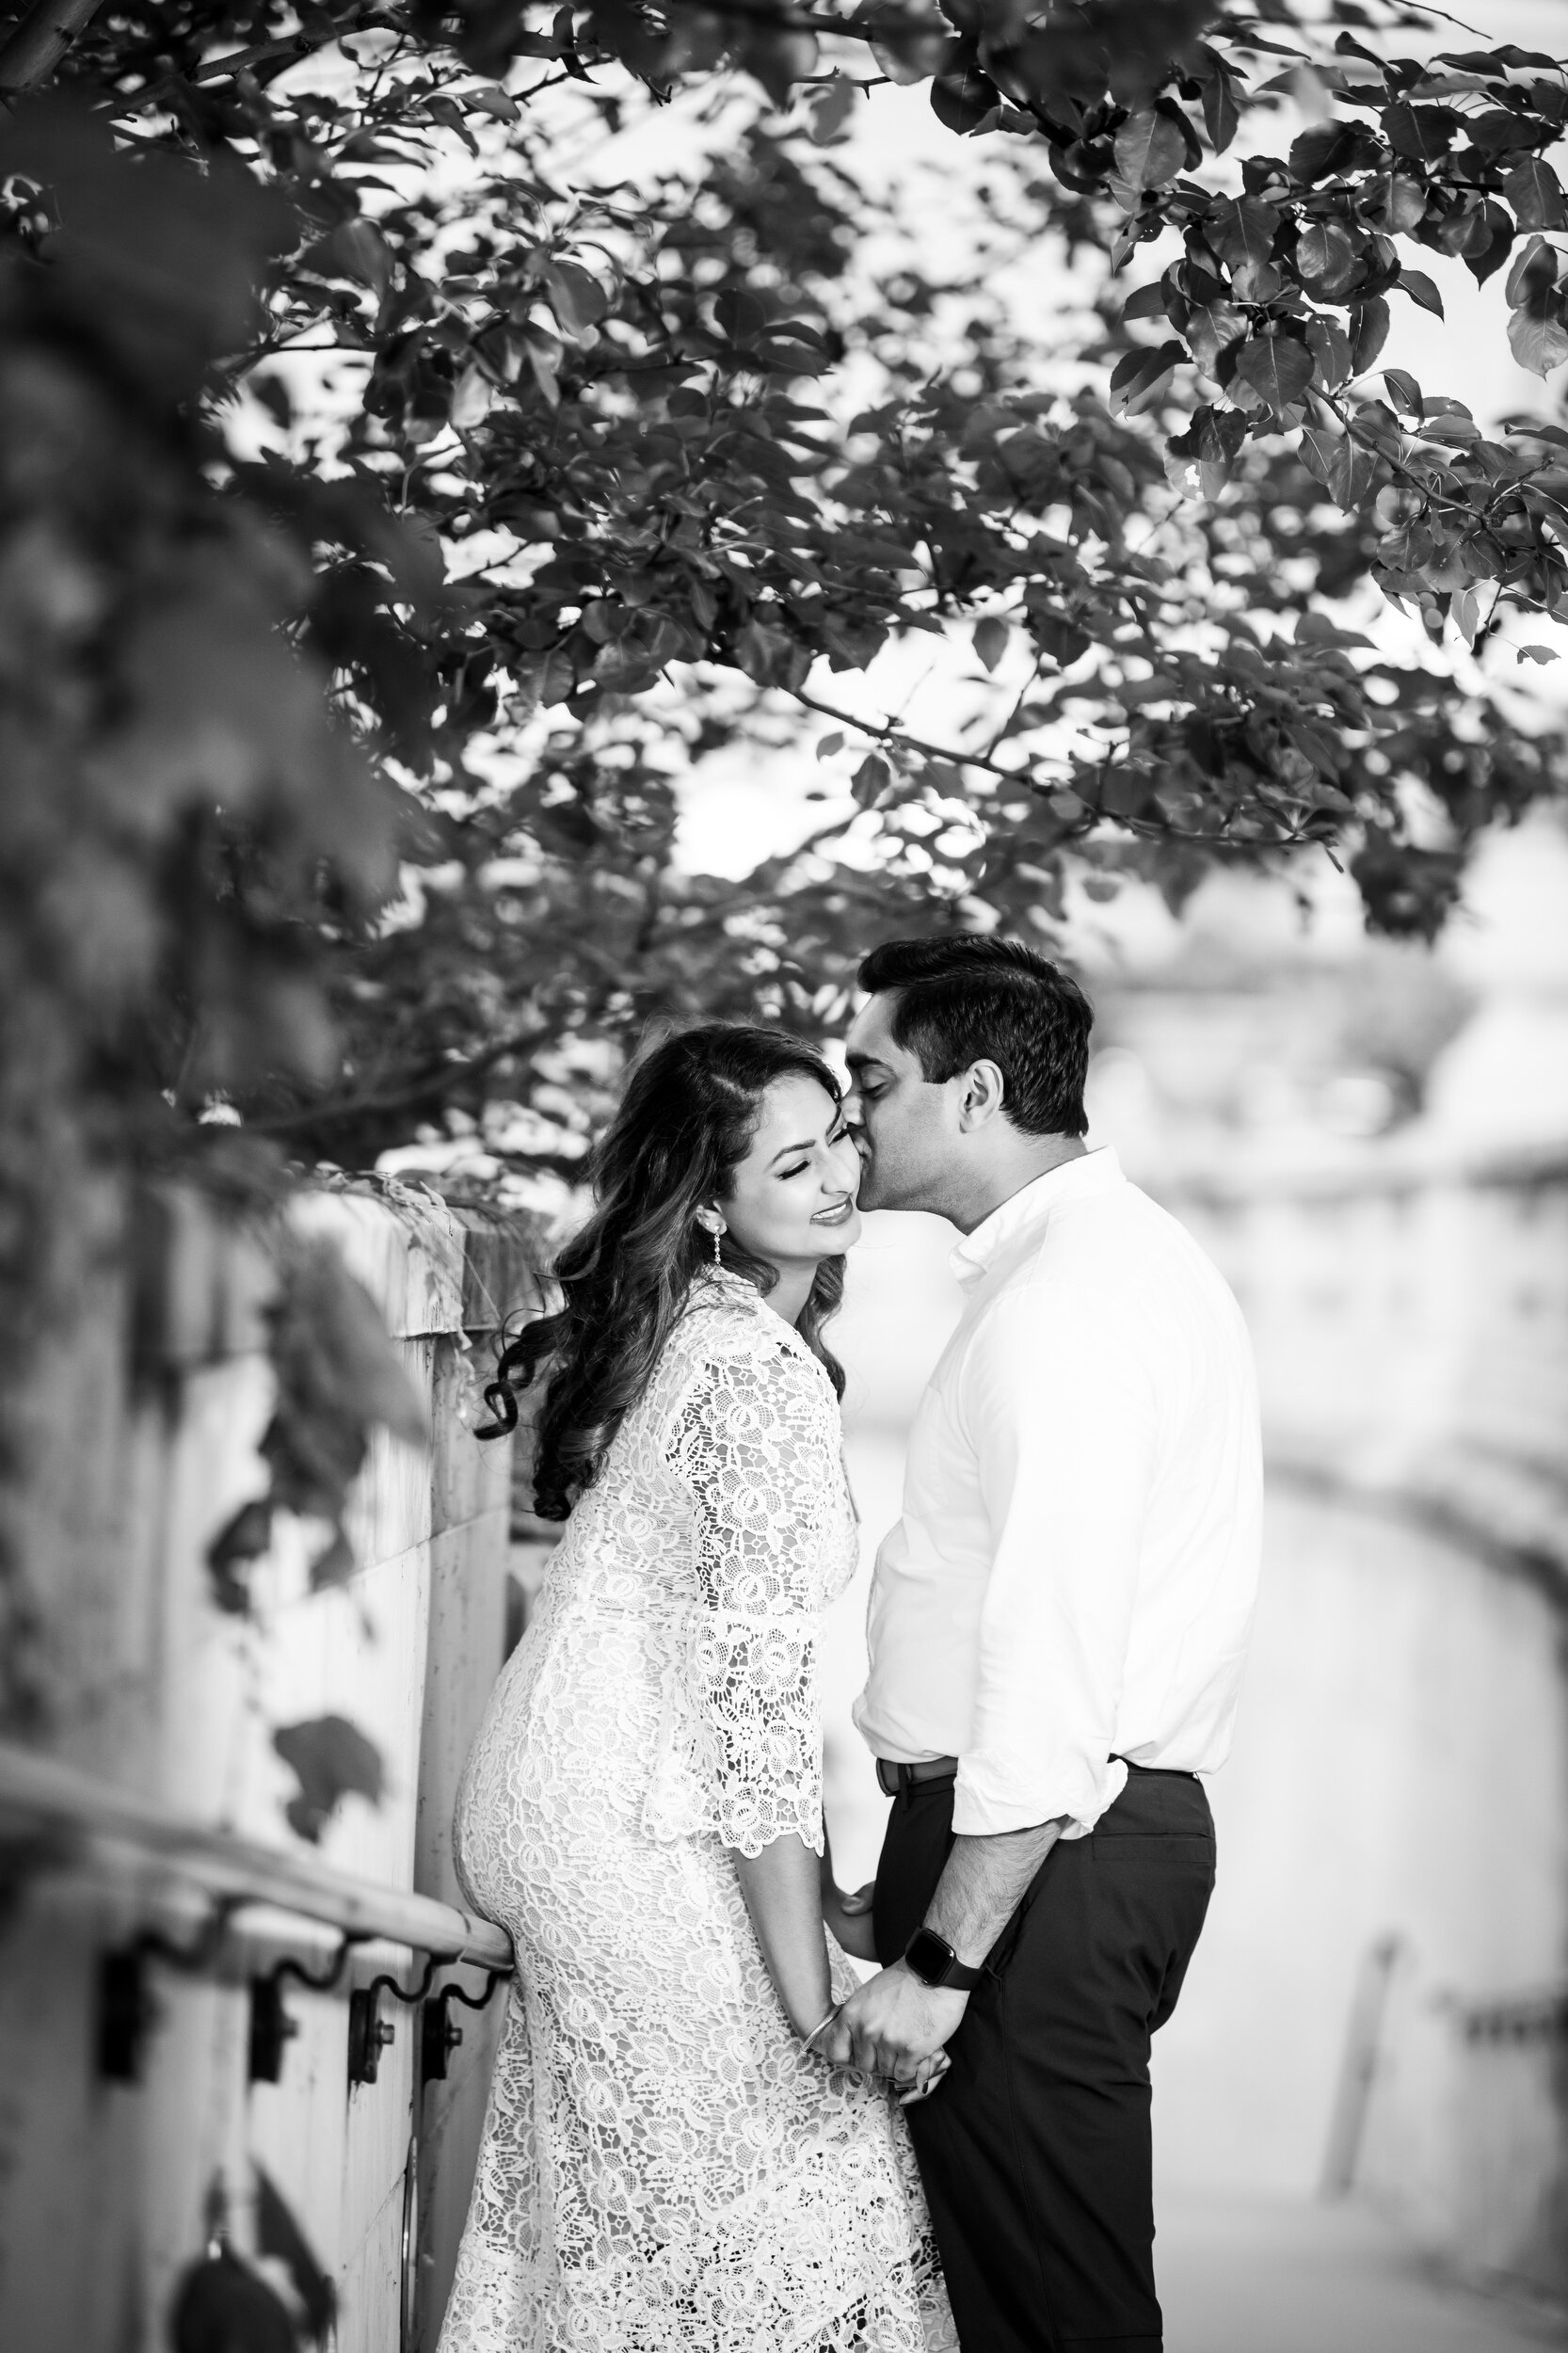 Fun summer engagement session on the Chicago riverwalk.